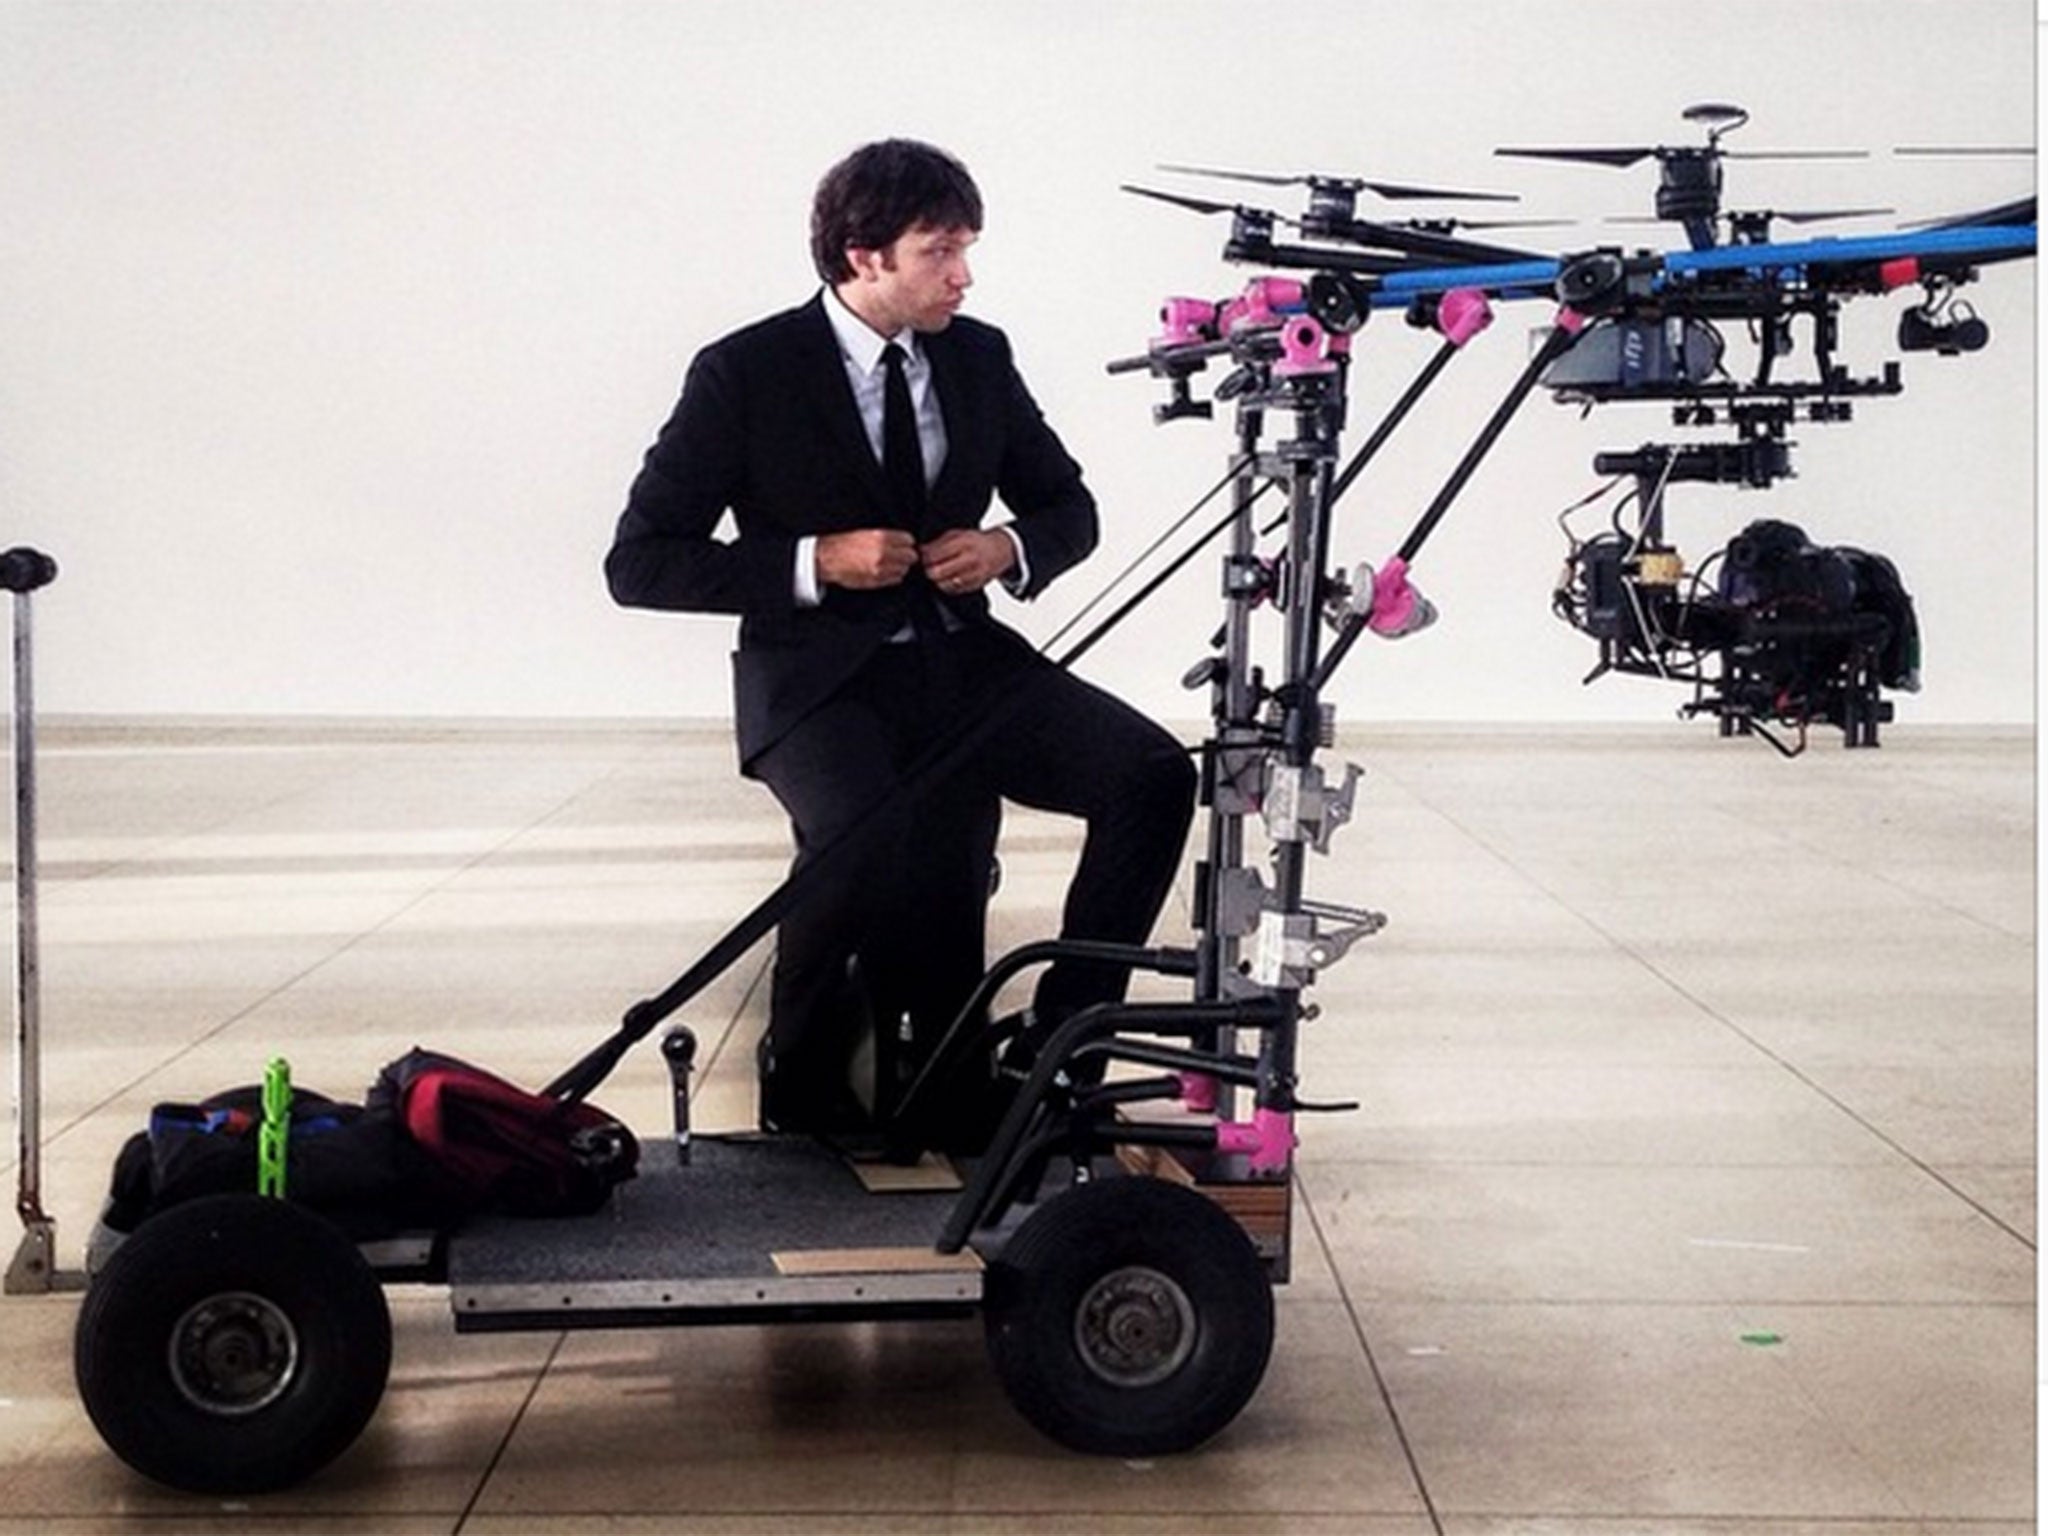 The awesome camera-equipped drone from OK Go's music video